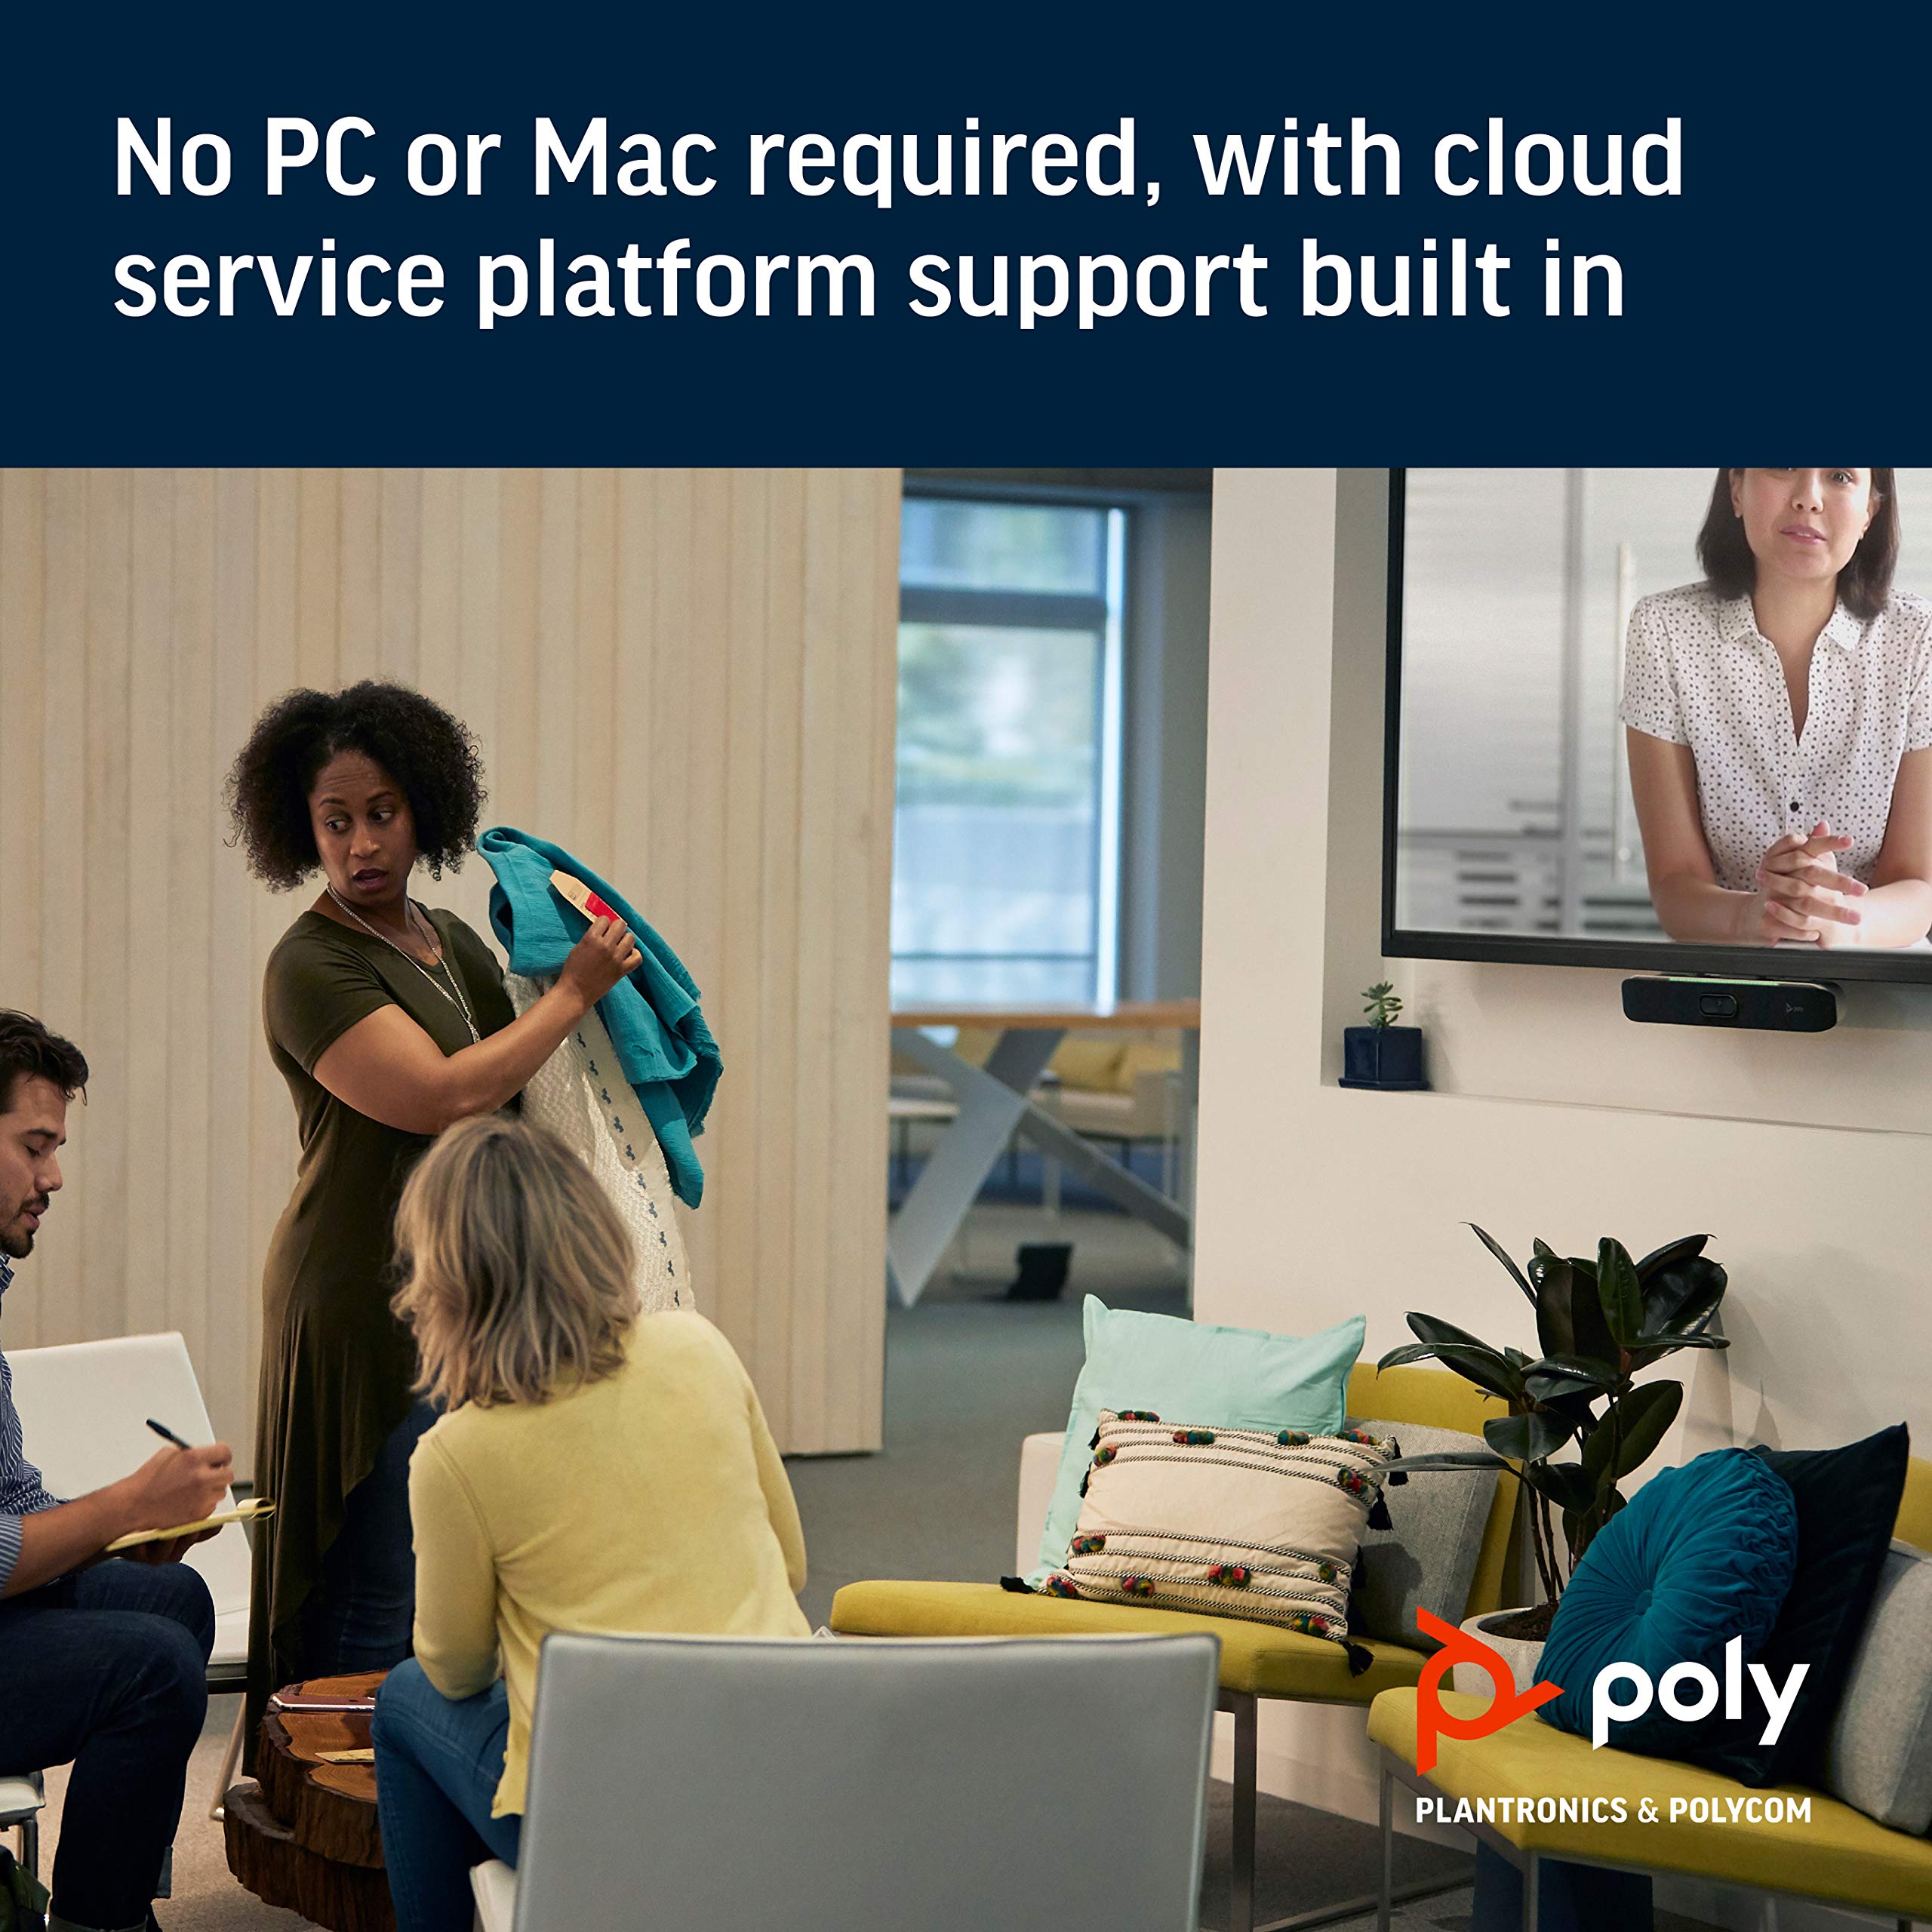 Poly - Studio X30 (Polycom) with TC8 Touch Controller - 4K Video & Audio Bar - Conferencing System for Small Meeting Rooms - Works with Teams, Zoom & More